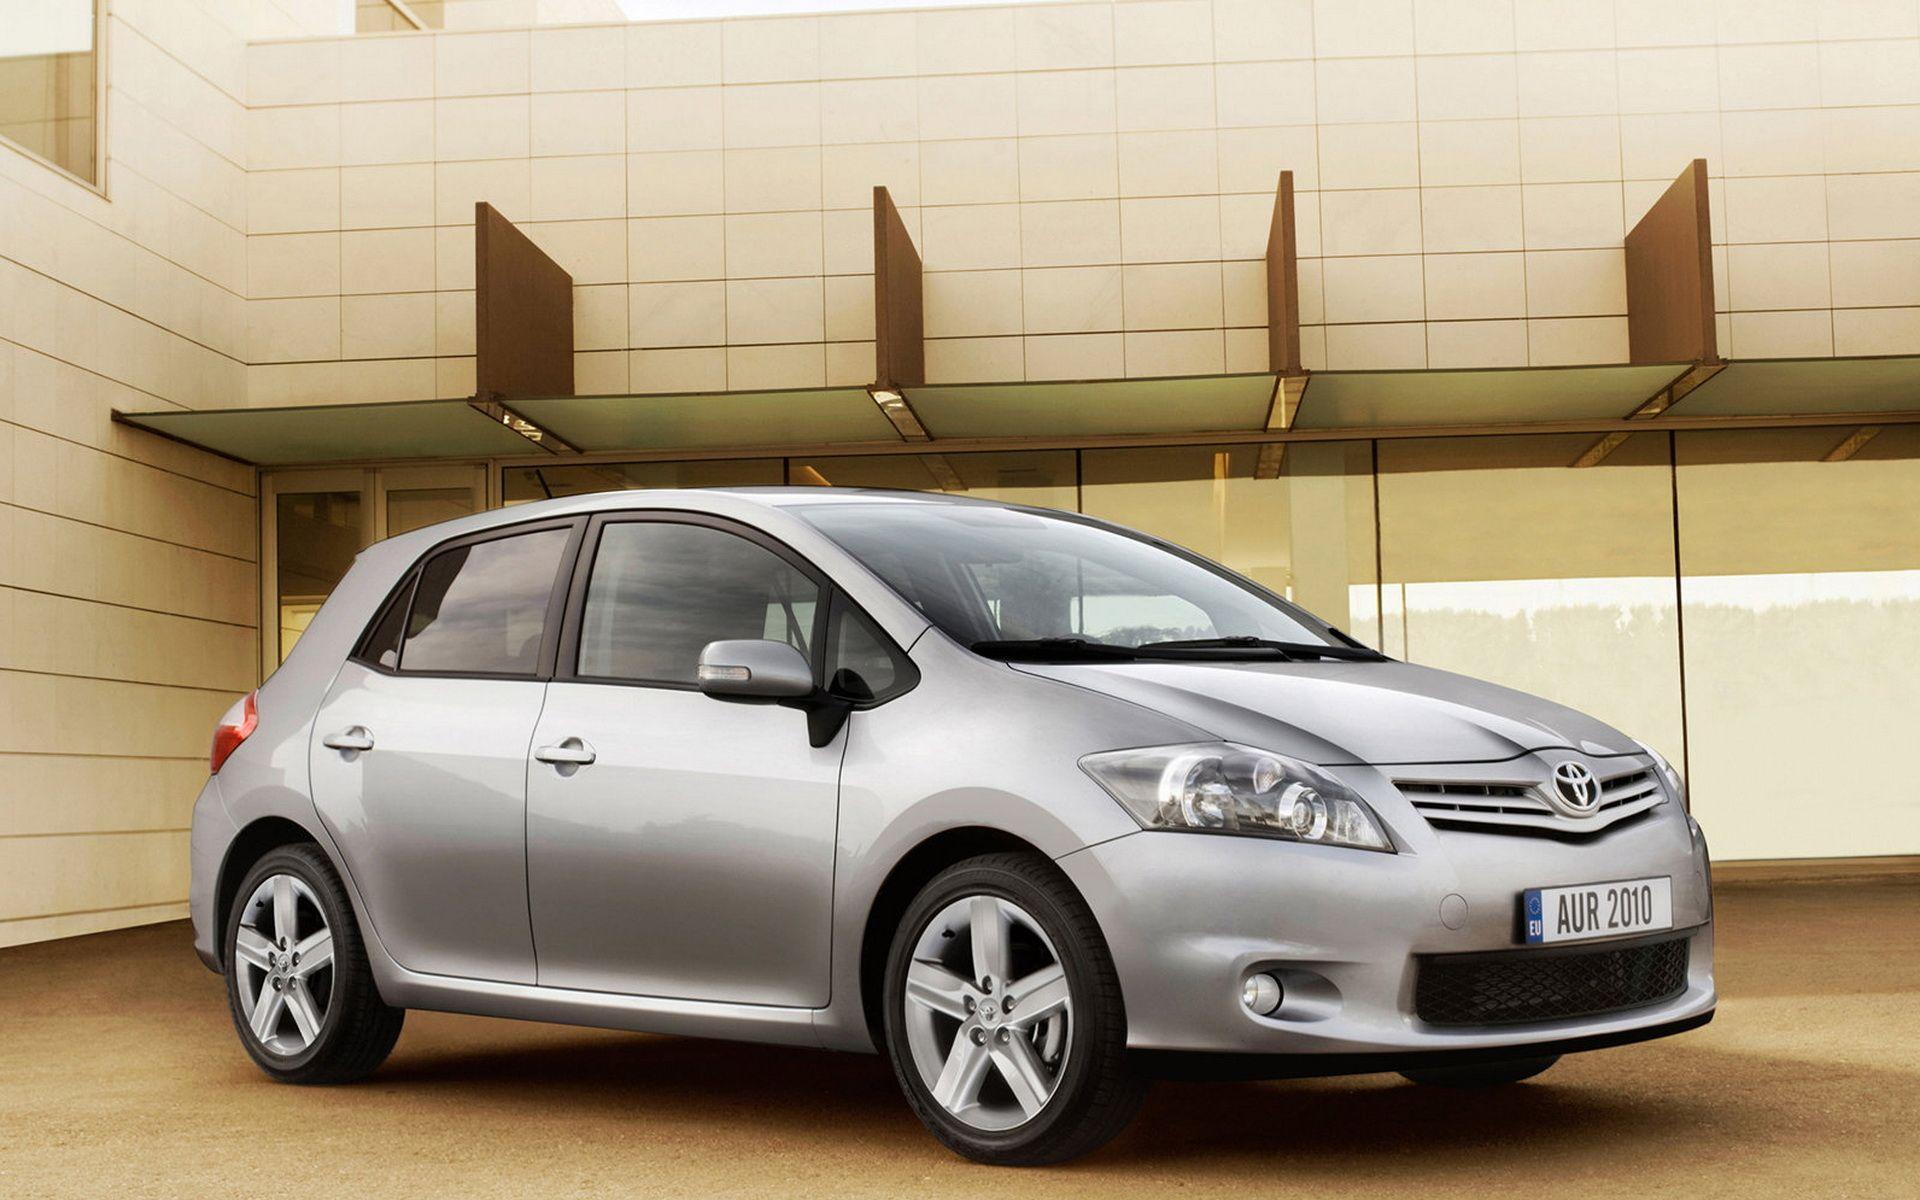 Toyota Auris 2010 Wallpaper And Image, Picture, Photo